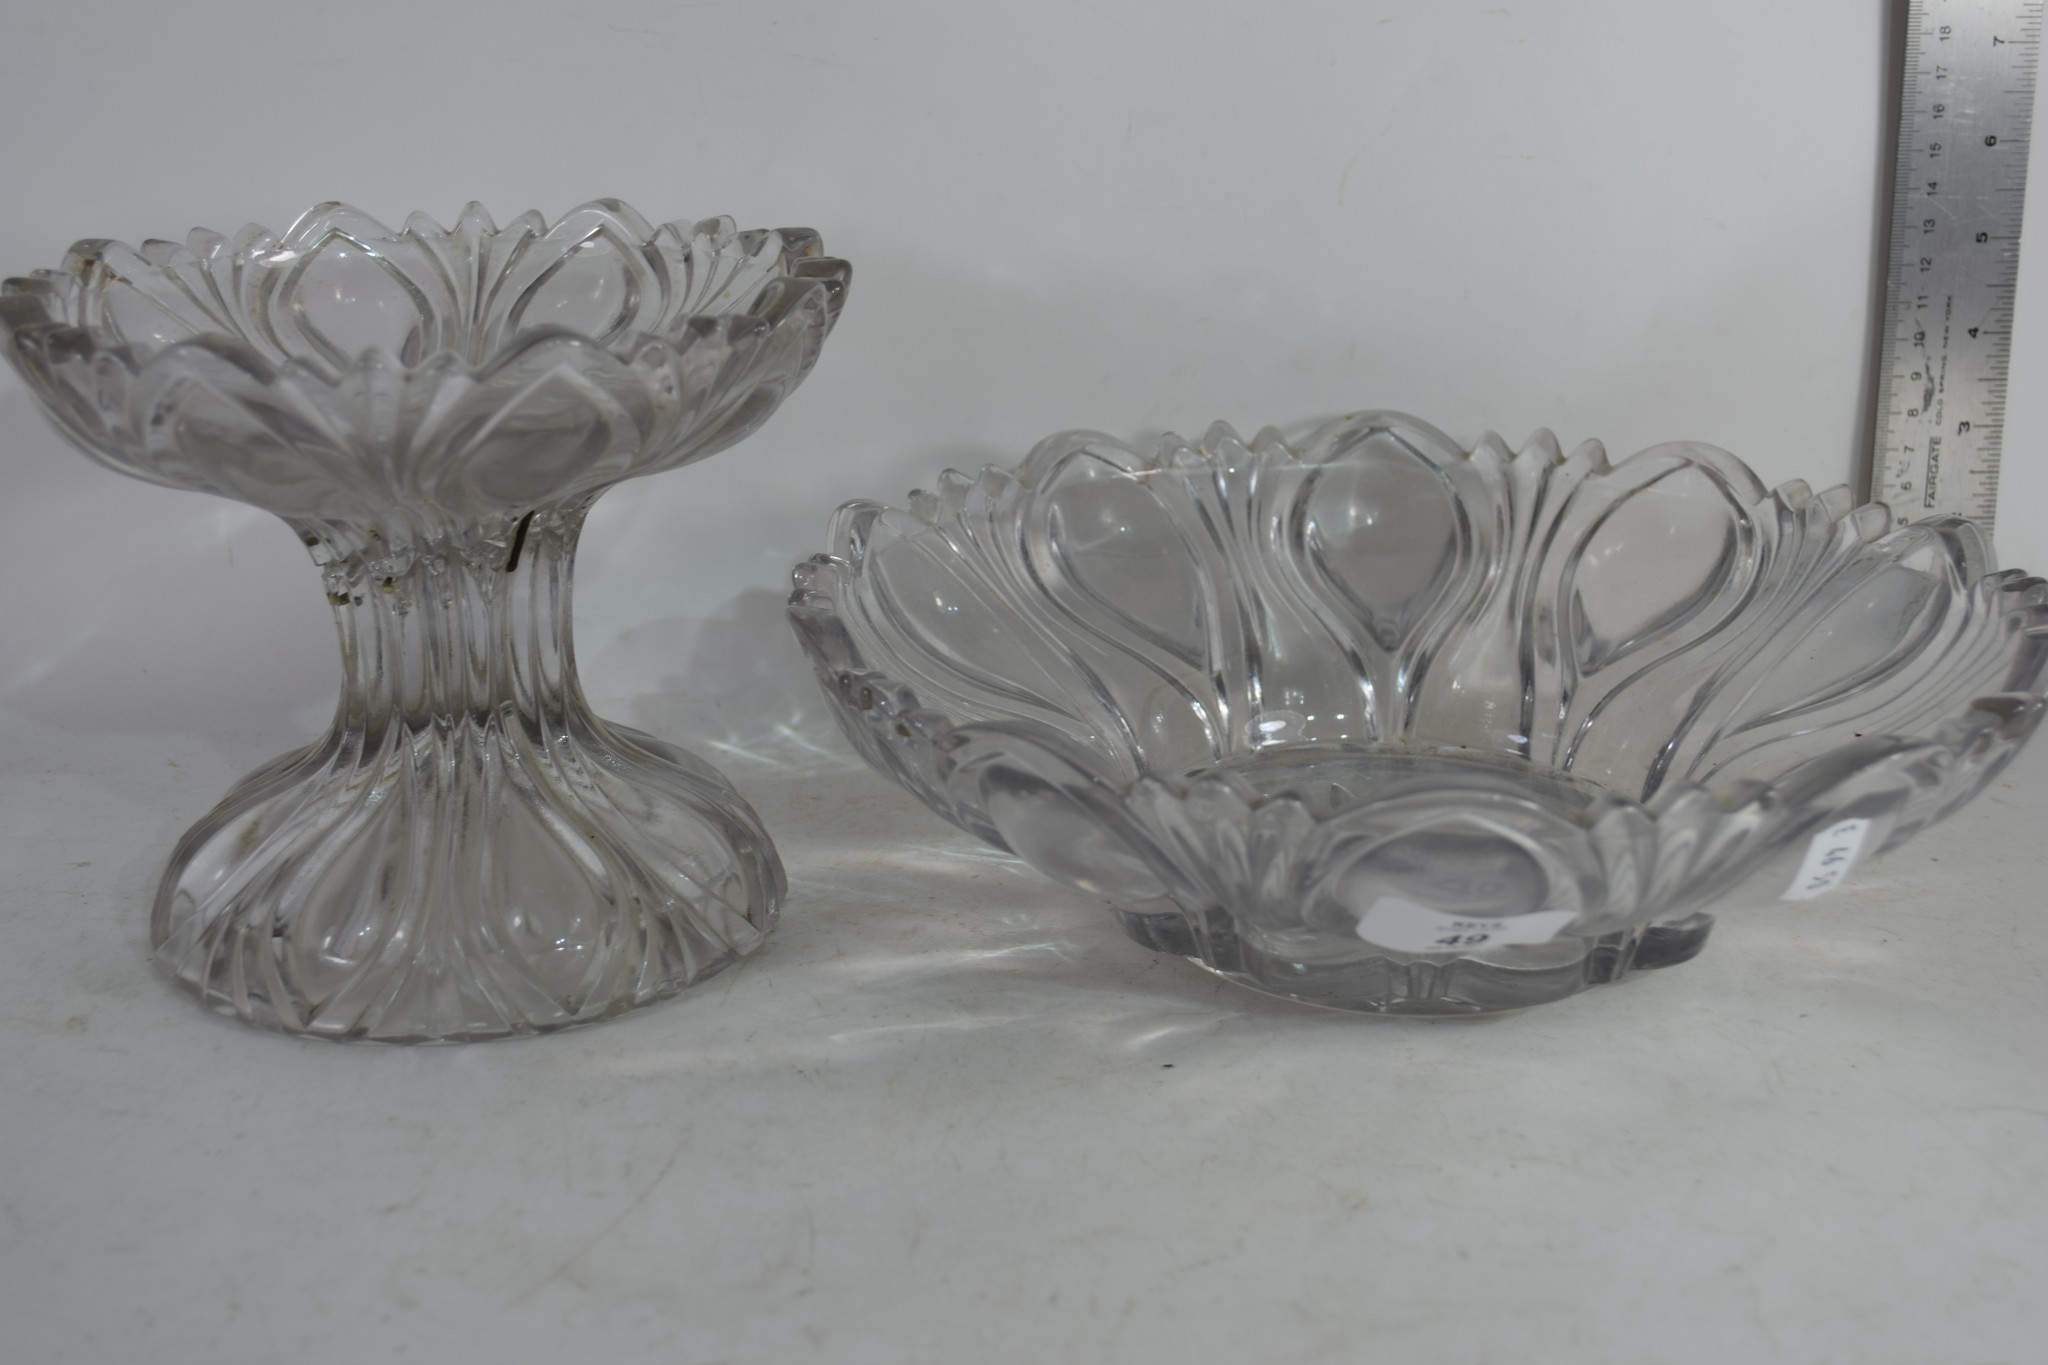 VINTAGE MOULDED GLASS BOWL ON STAND (A/F)